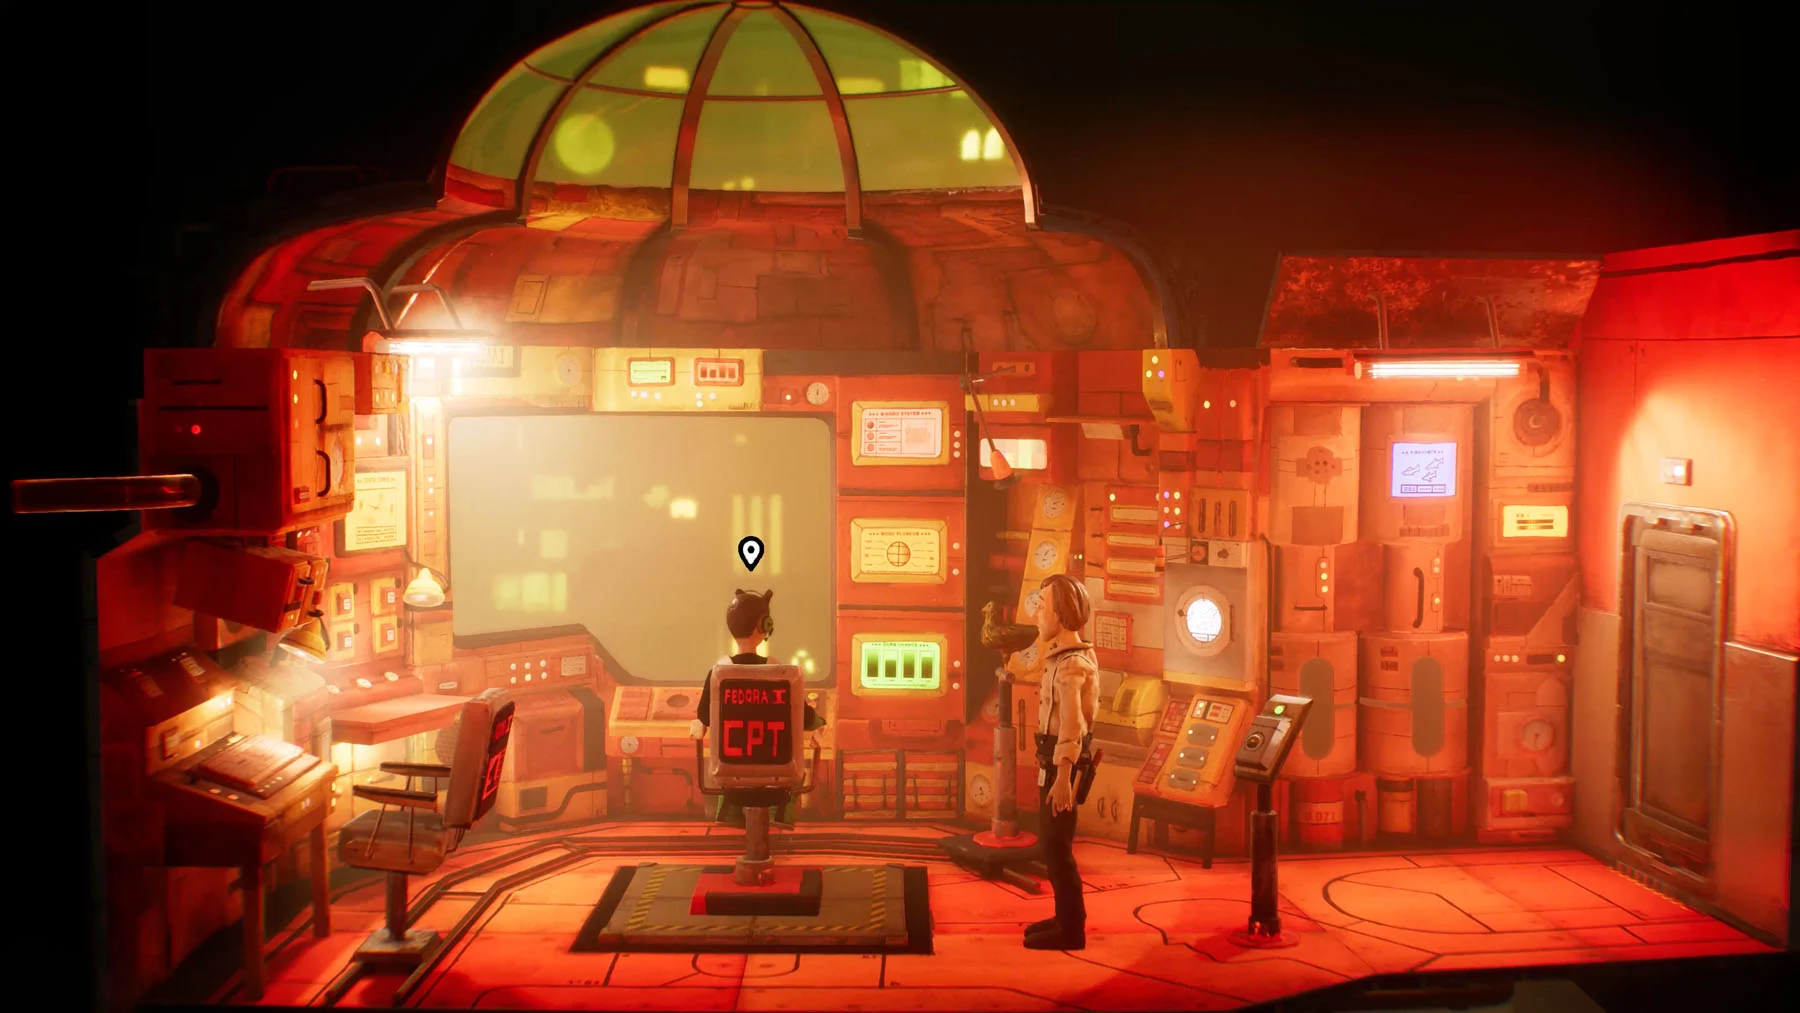 A still from the handmade video game Harold Halibut. It shows two people sitting in the cockpit of a spaceship, with many control panels and buttons around them and a bright red light filling the room.